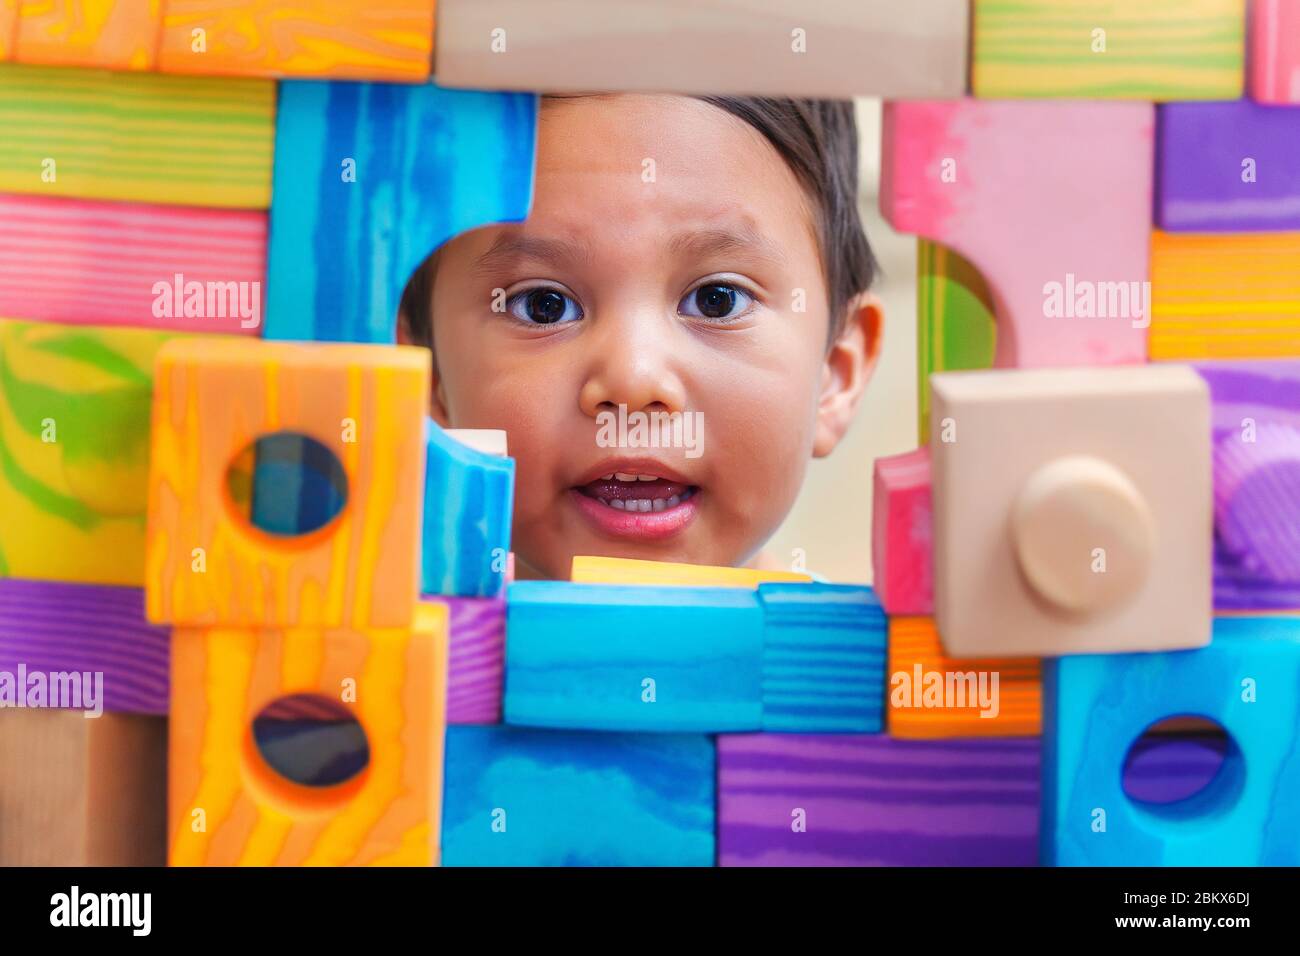 A young boy showing his face through a window from behind a wall of building blocks with various shapes and colors. Stock Photo